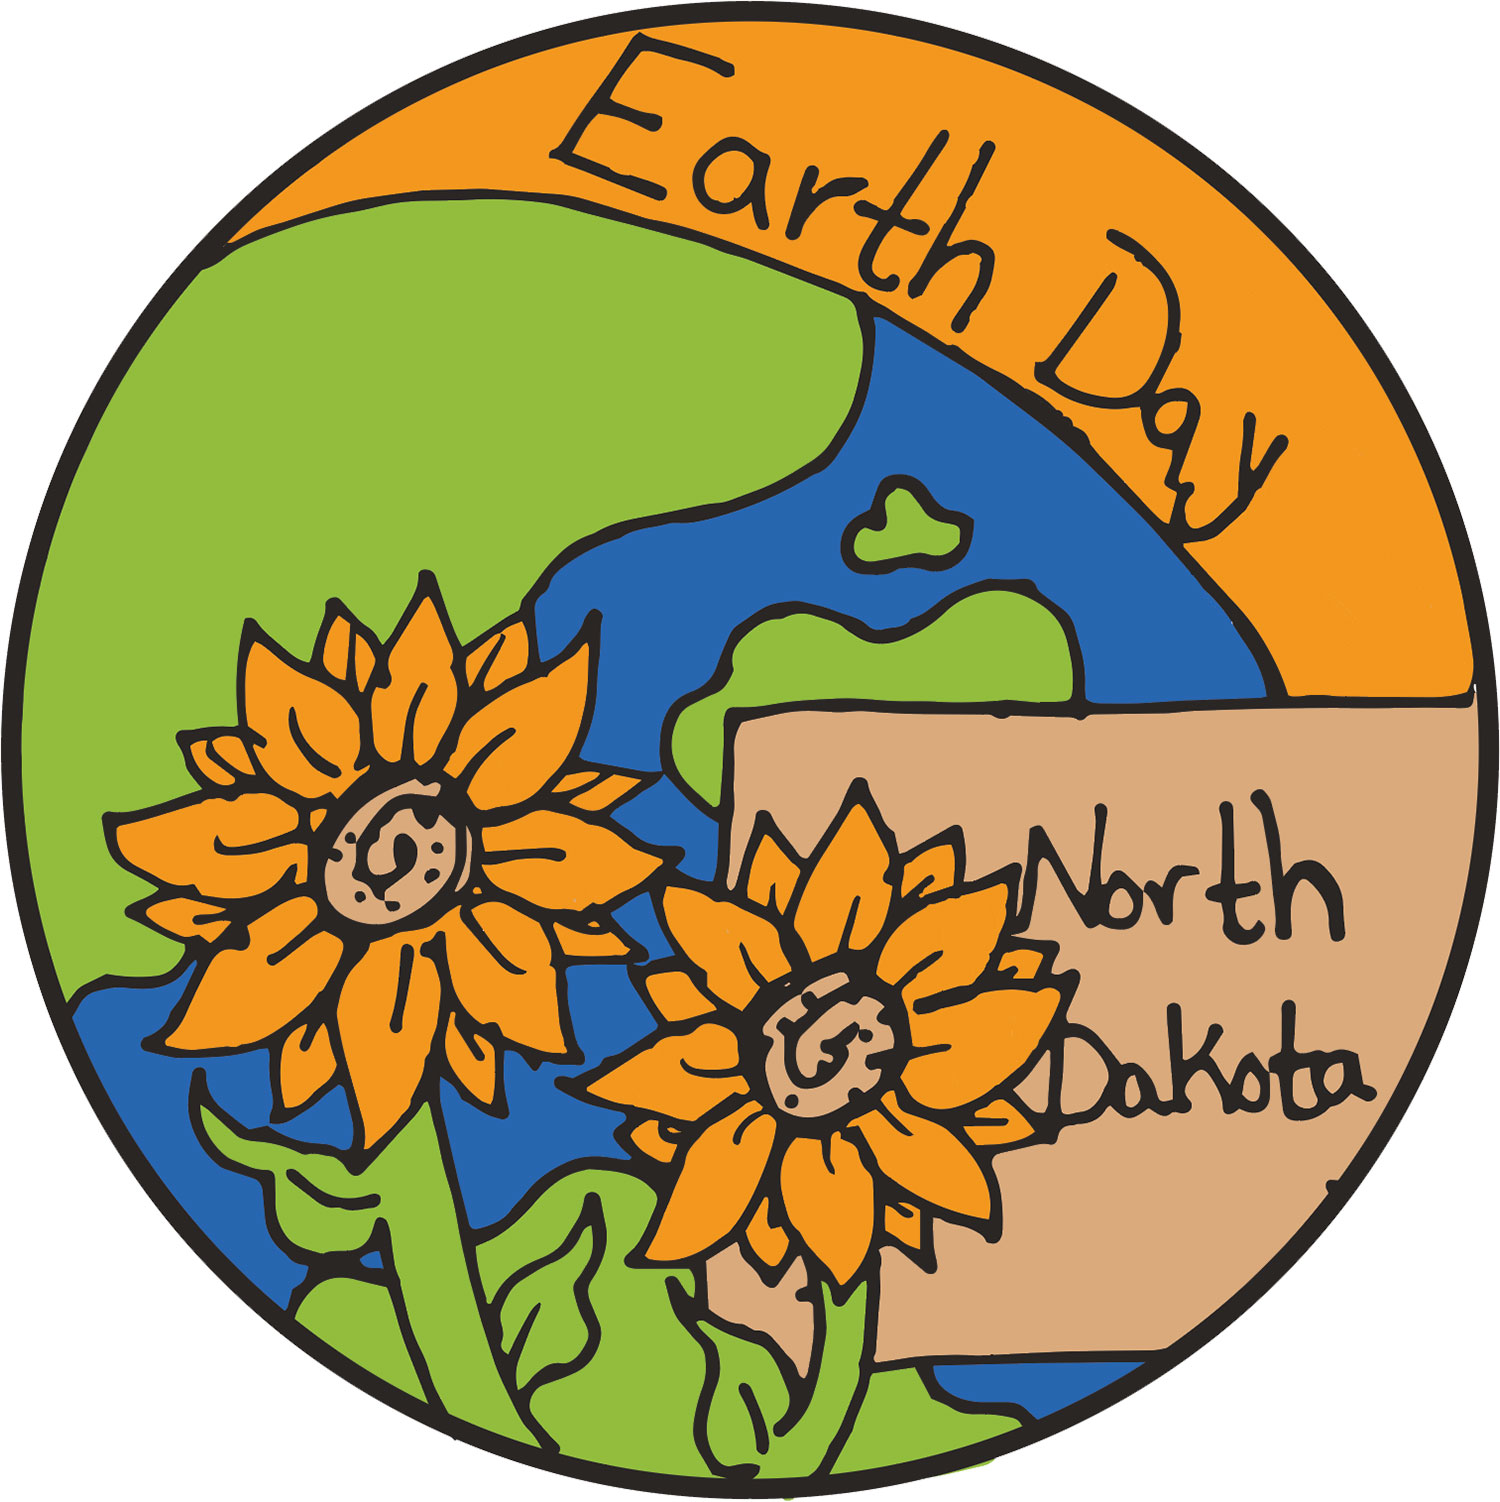 Earth day patch example